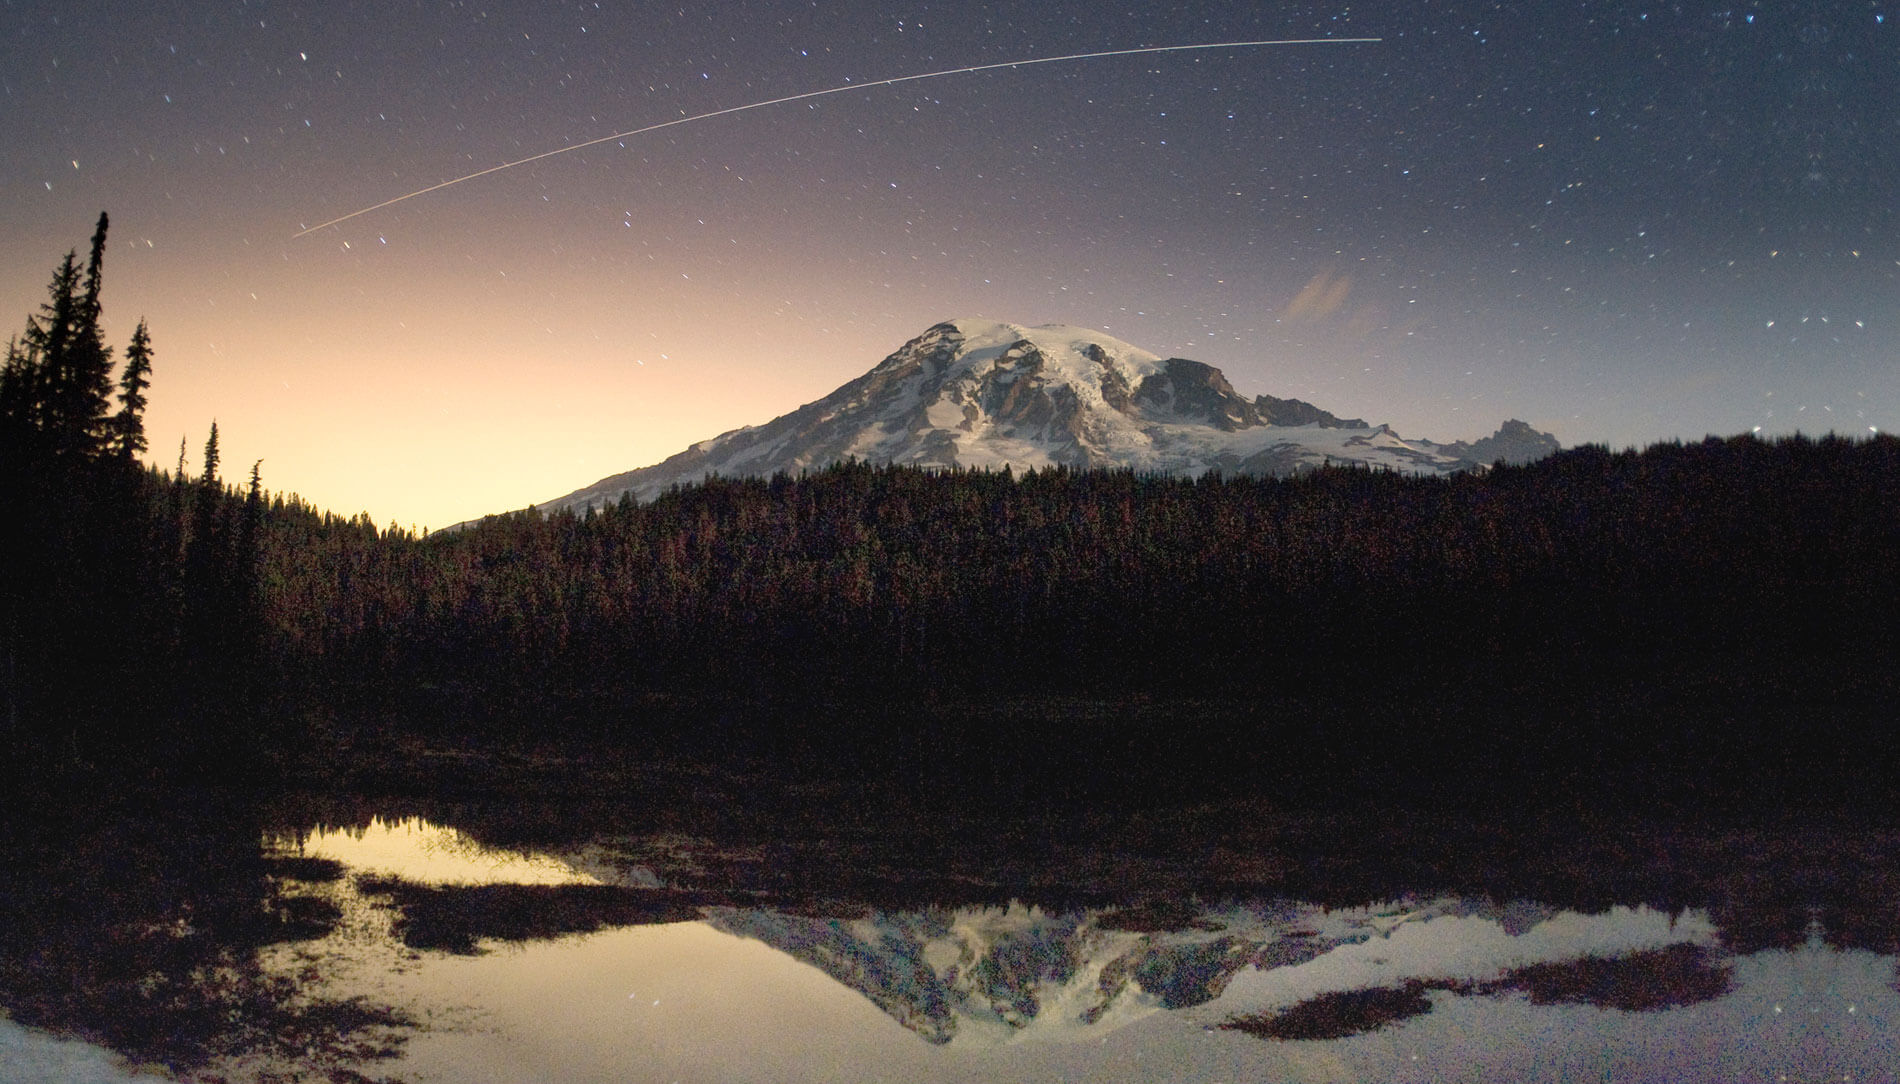 The International Space Station passes over Mount Rainier in this multiple-second photo exposure